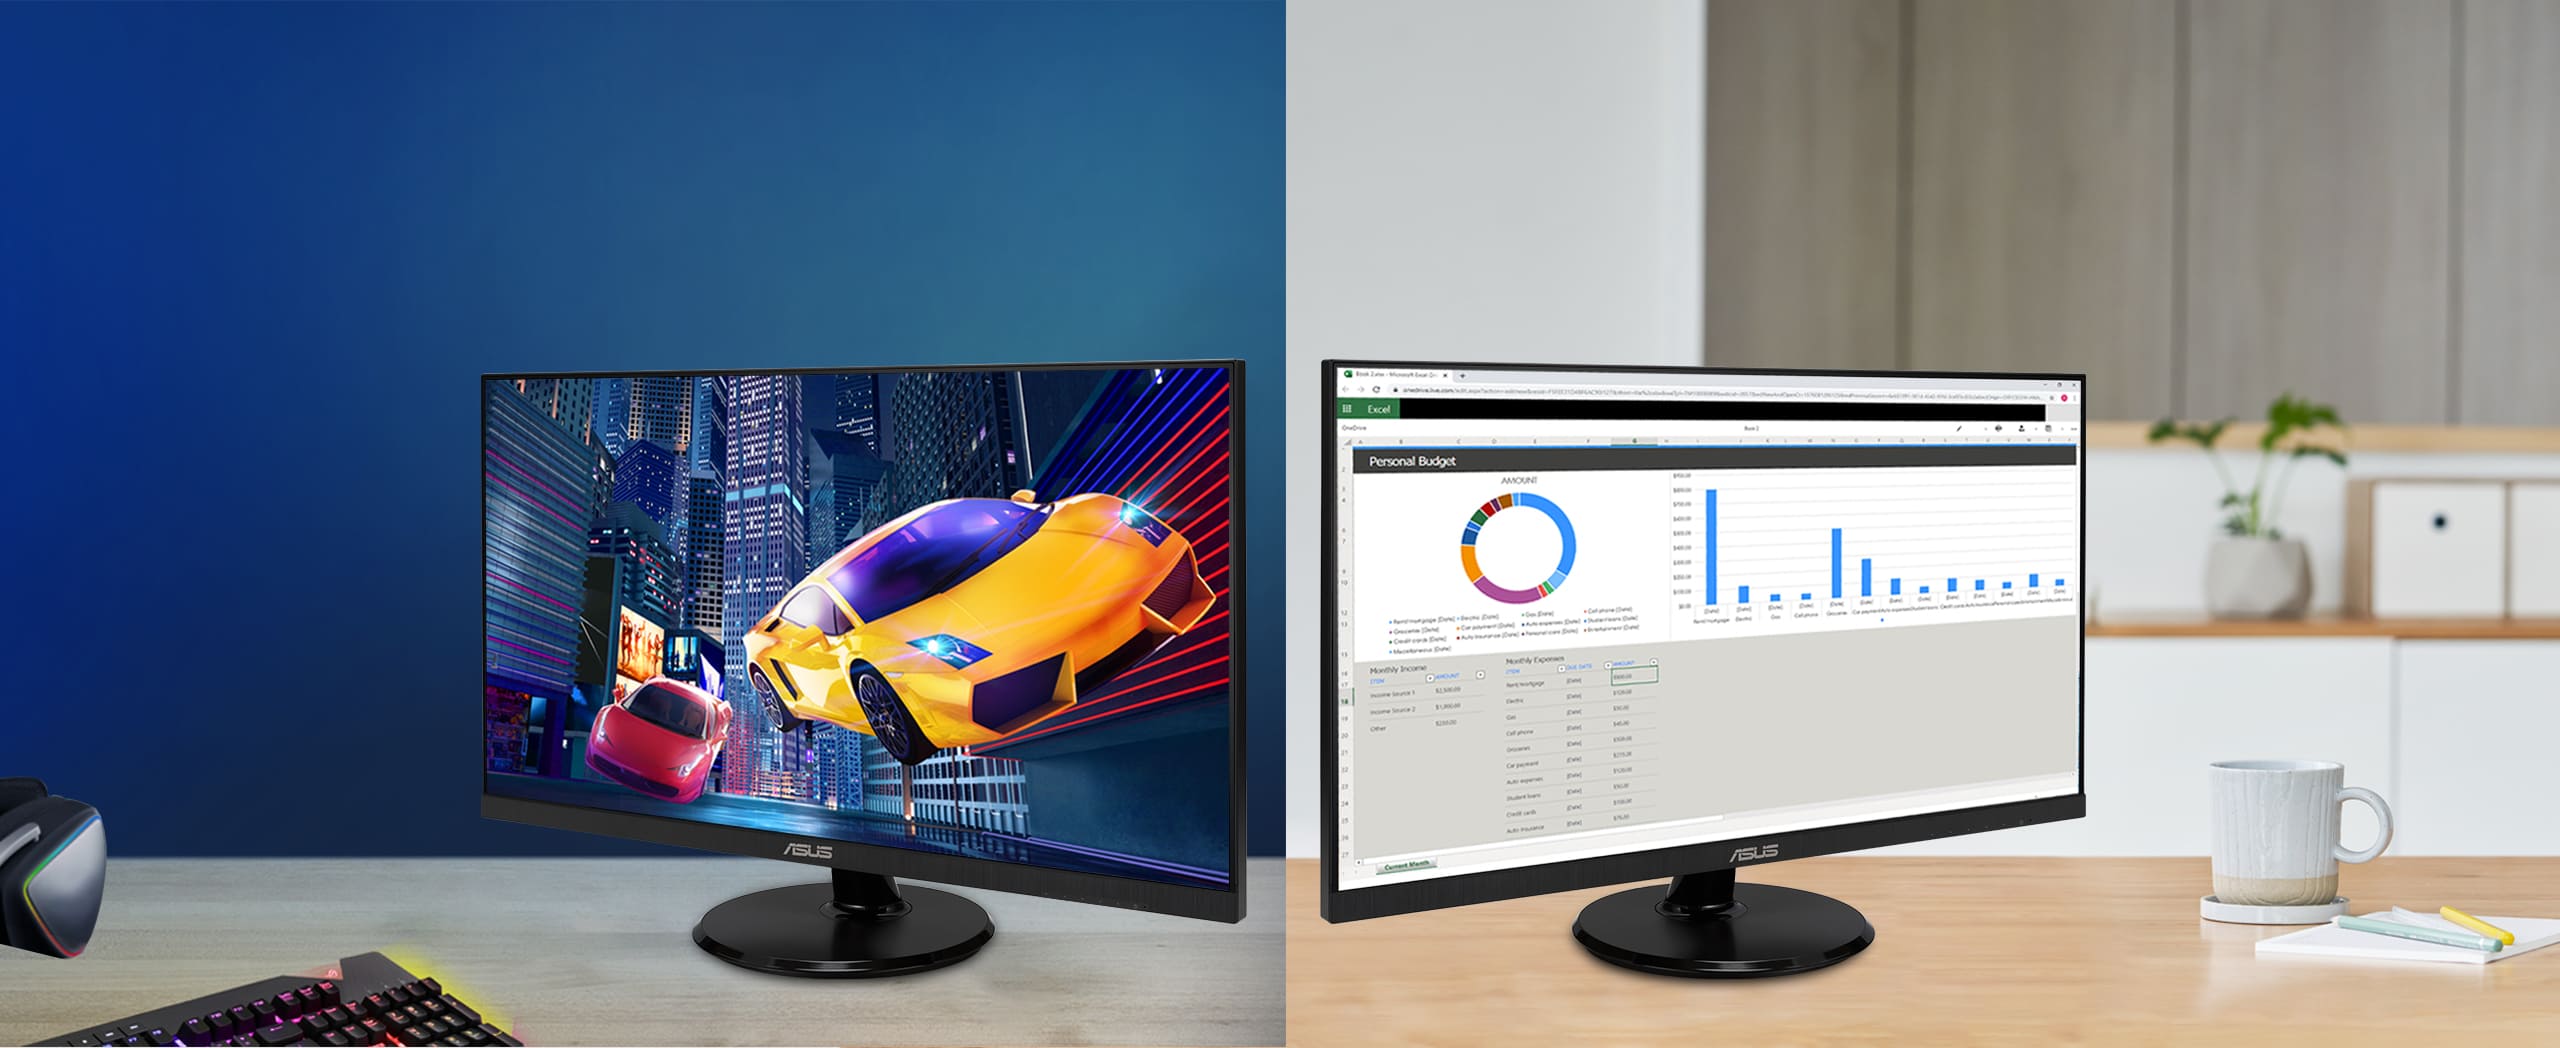 ASUS VA24DQFR is 24-inch (23.8-inch viewable) IPS Eye Care Gaming monitor with fast 100Hz refresh rate and Adaptive-Sync technology to eliminate screen tearing and choppy frame rates for the smoother-than-ever experience.